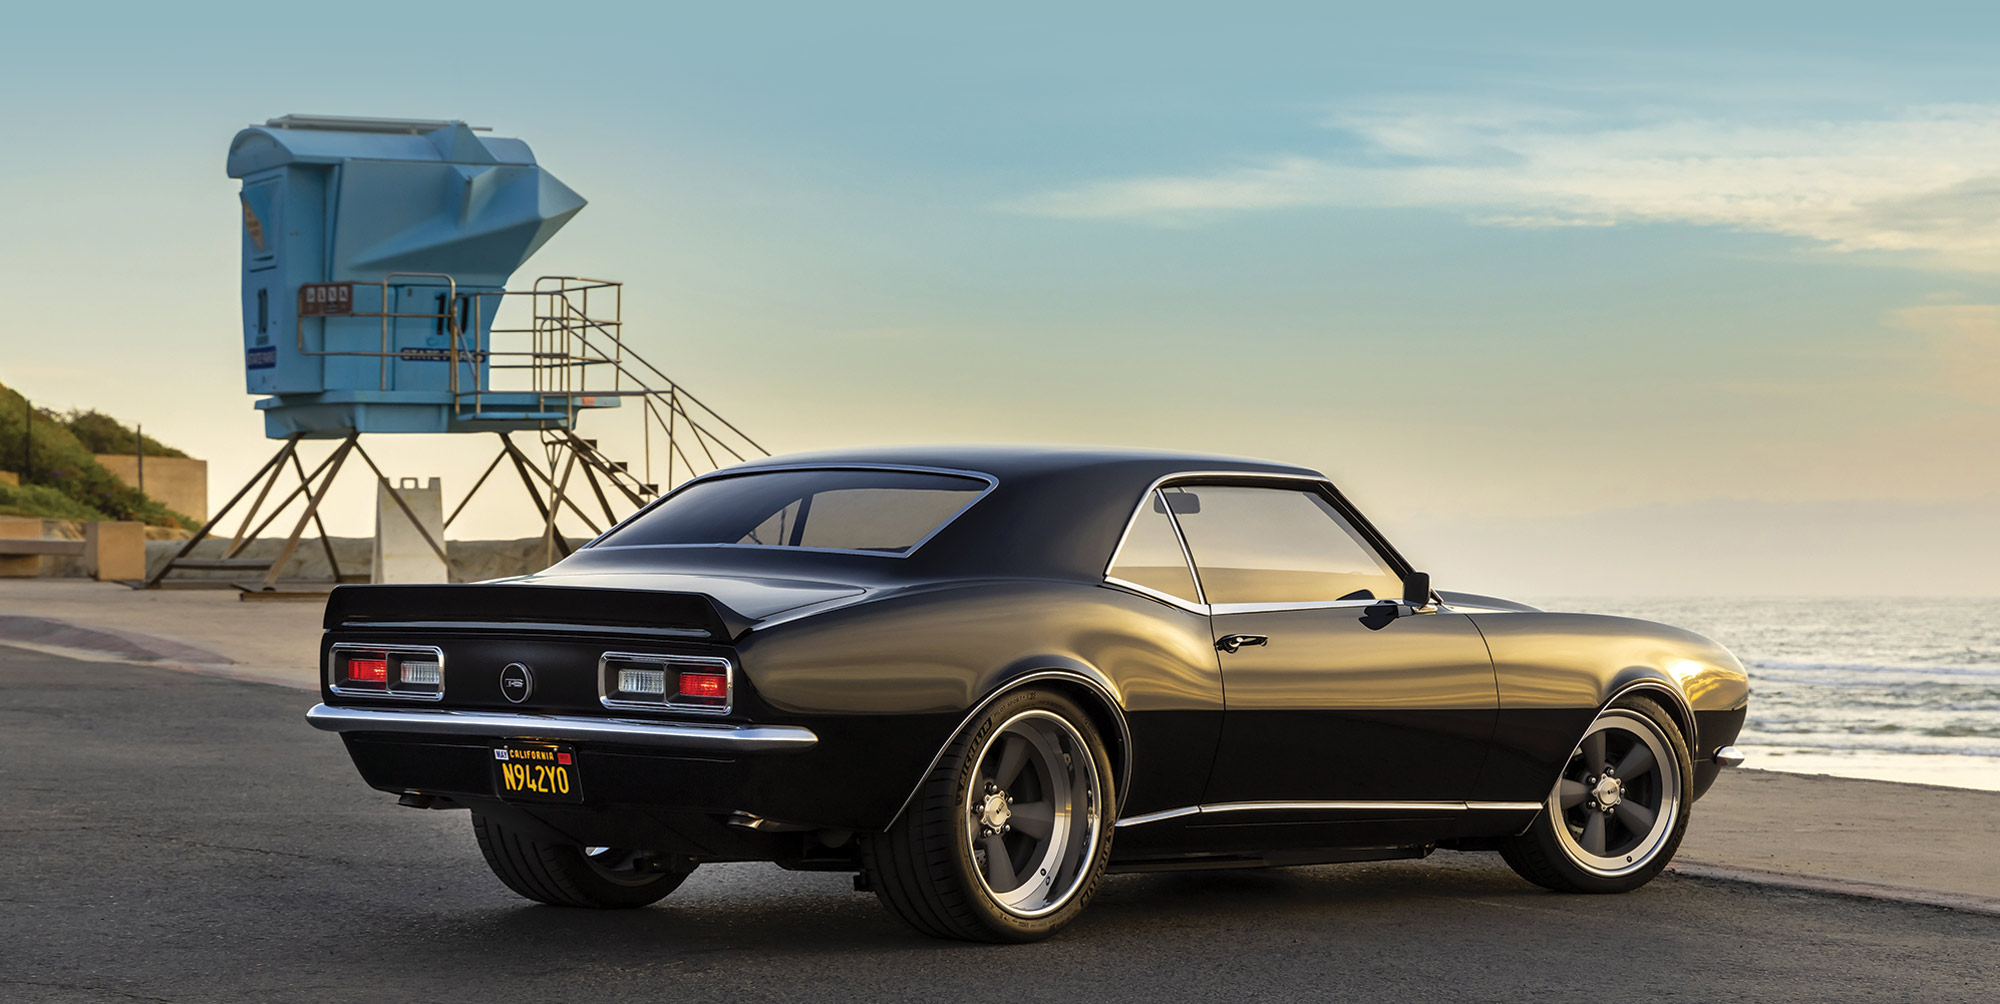 1968 Camaro side profile with beach tower behind it